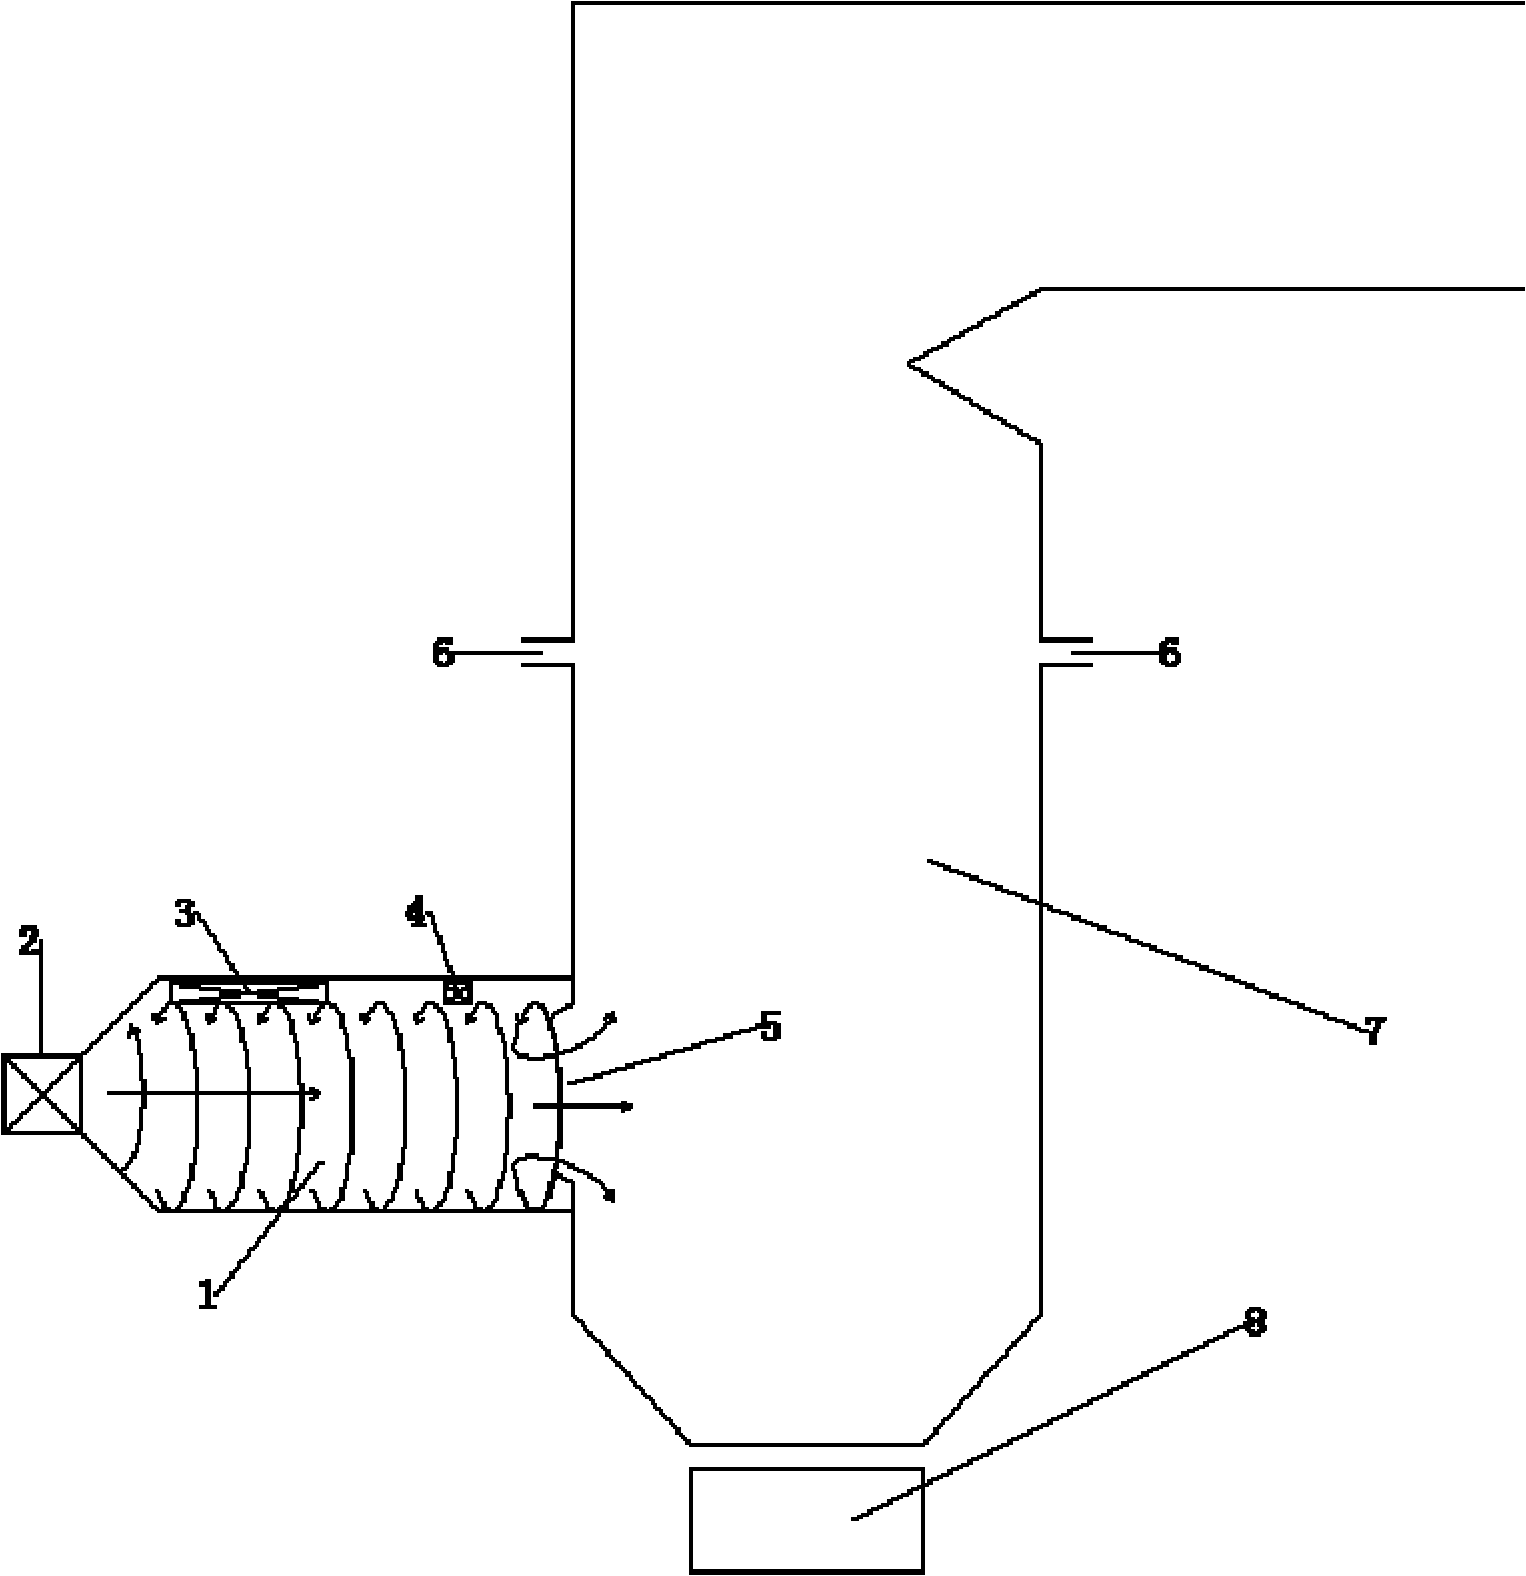 Cyclone burning method and device for reburning fuel in cyclone drum for denitration